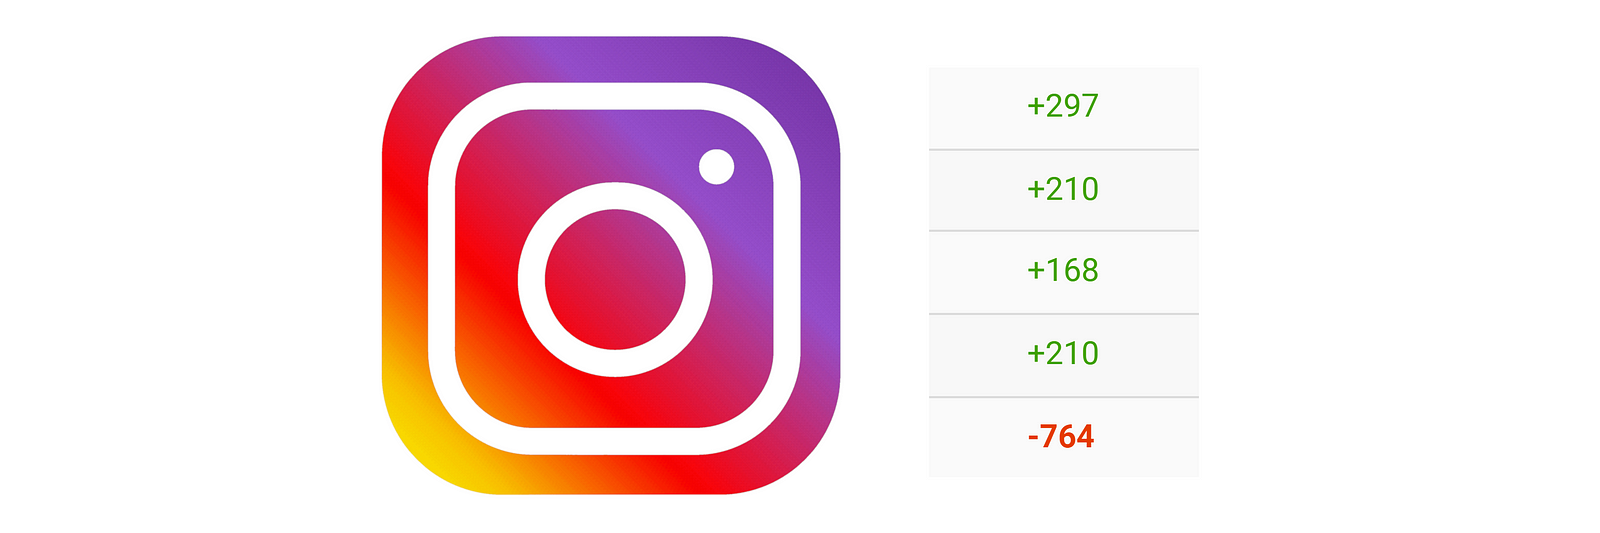 instagram glitch results in mass follower loss updated - how to upgrade my instagram followers